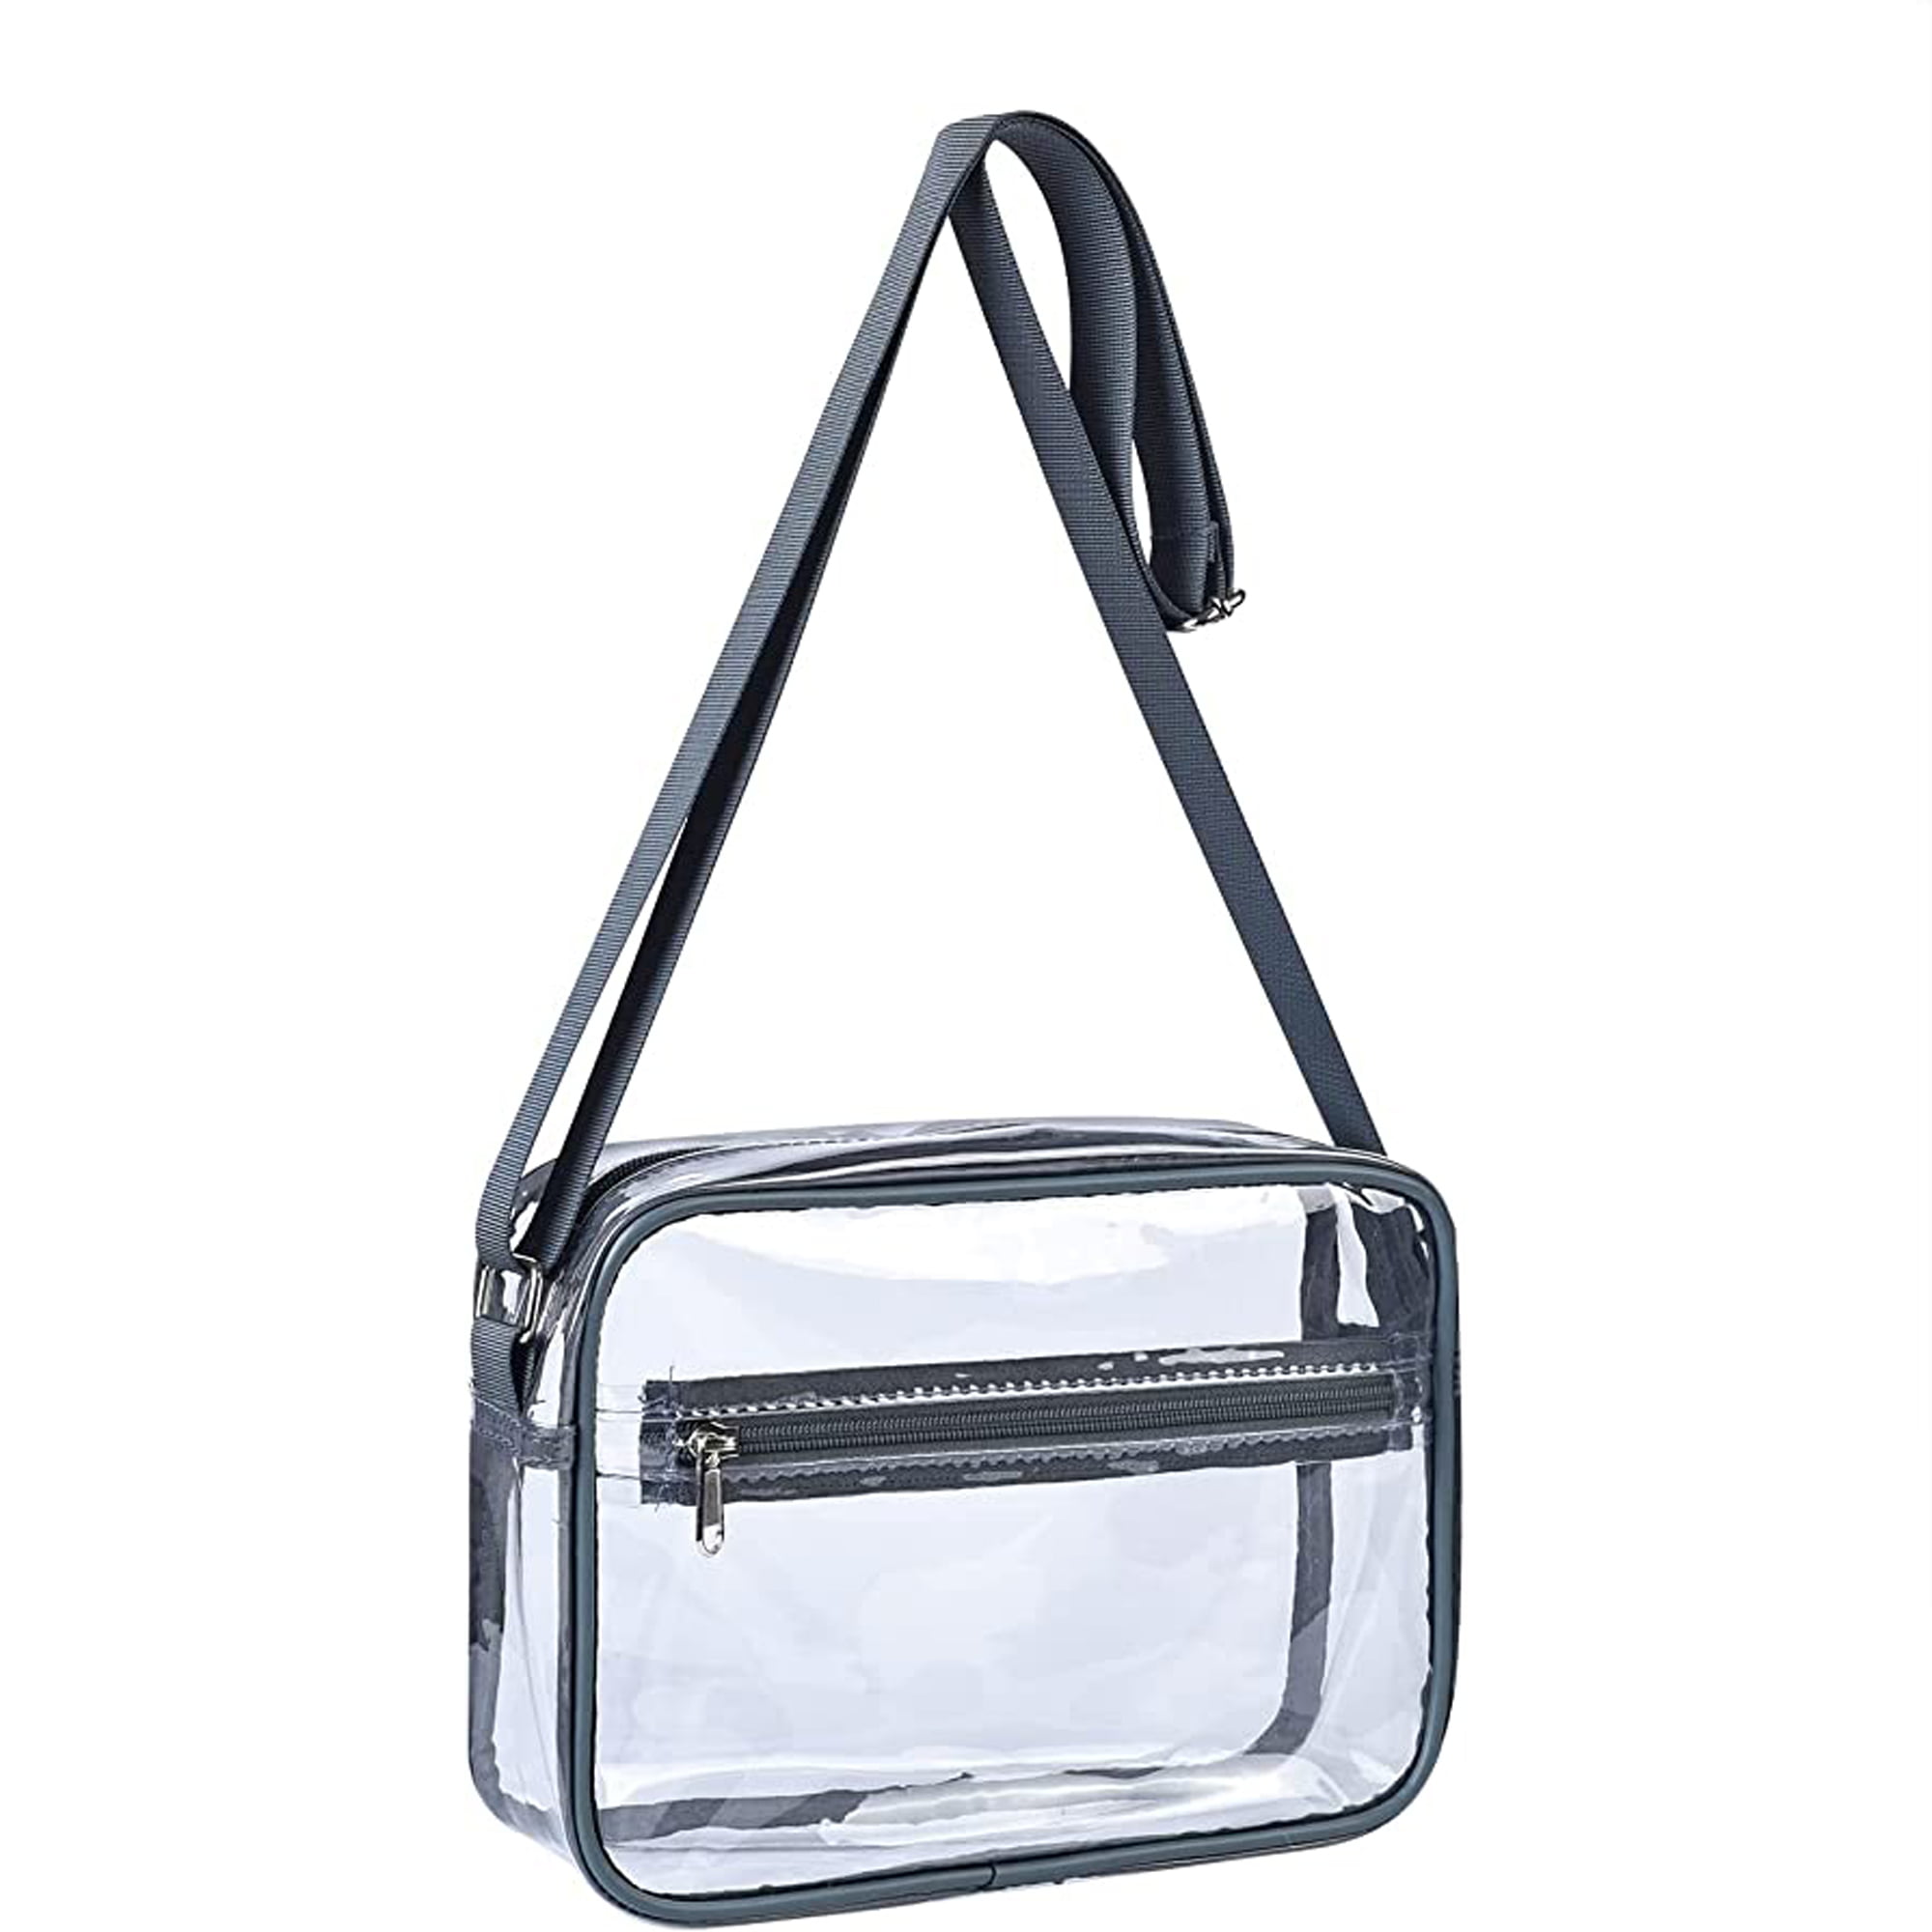 INICAT Clear Crossbody Purse Bag, Pga Stadium Aprroved Clear Handbags for Work, Concerts, Sports Events